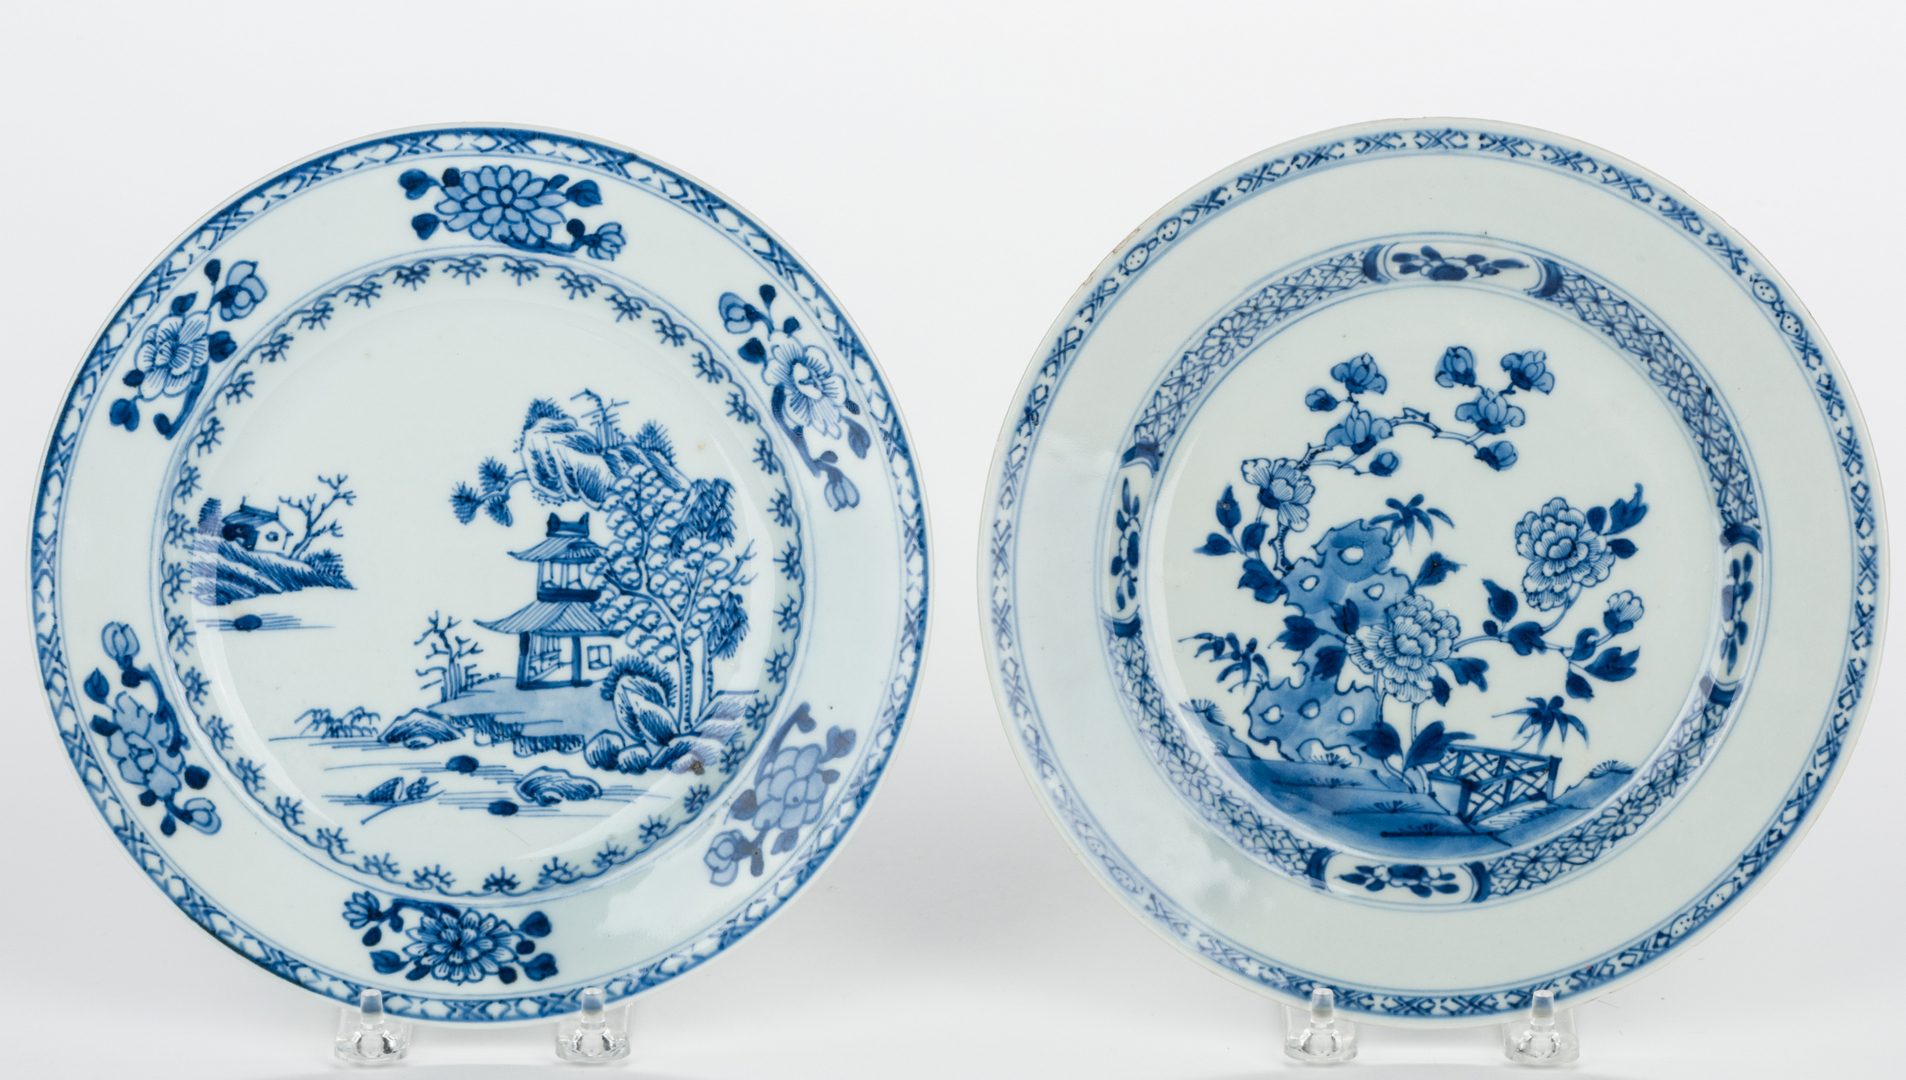 Lot 22: 4 Chinese Export Porcelain Plates